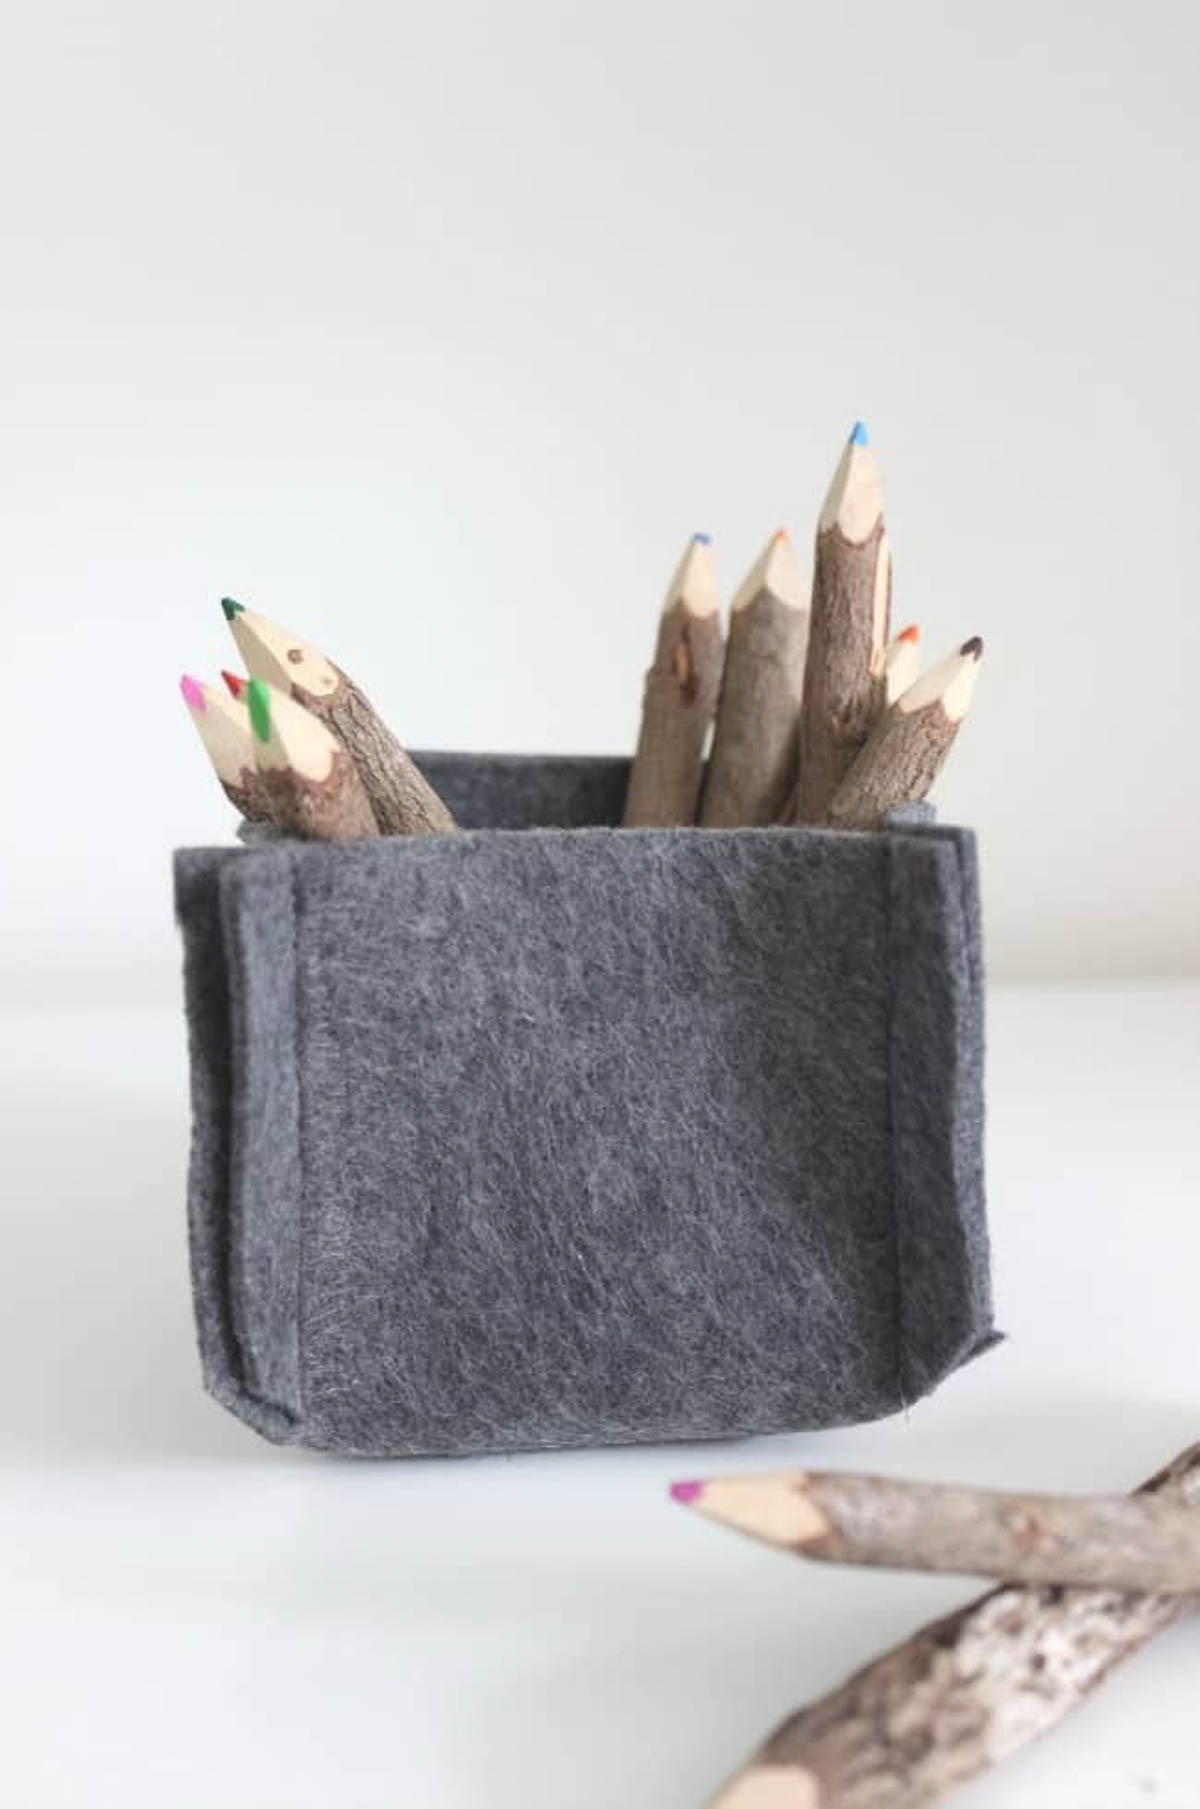 Felt container with colored pencils